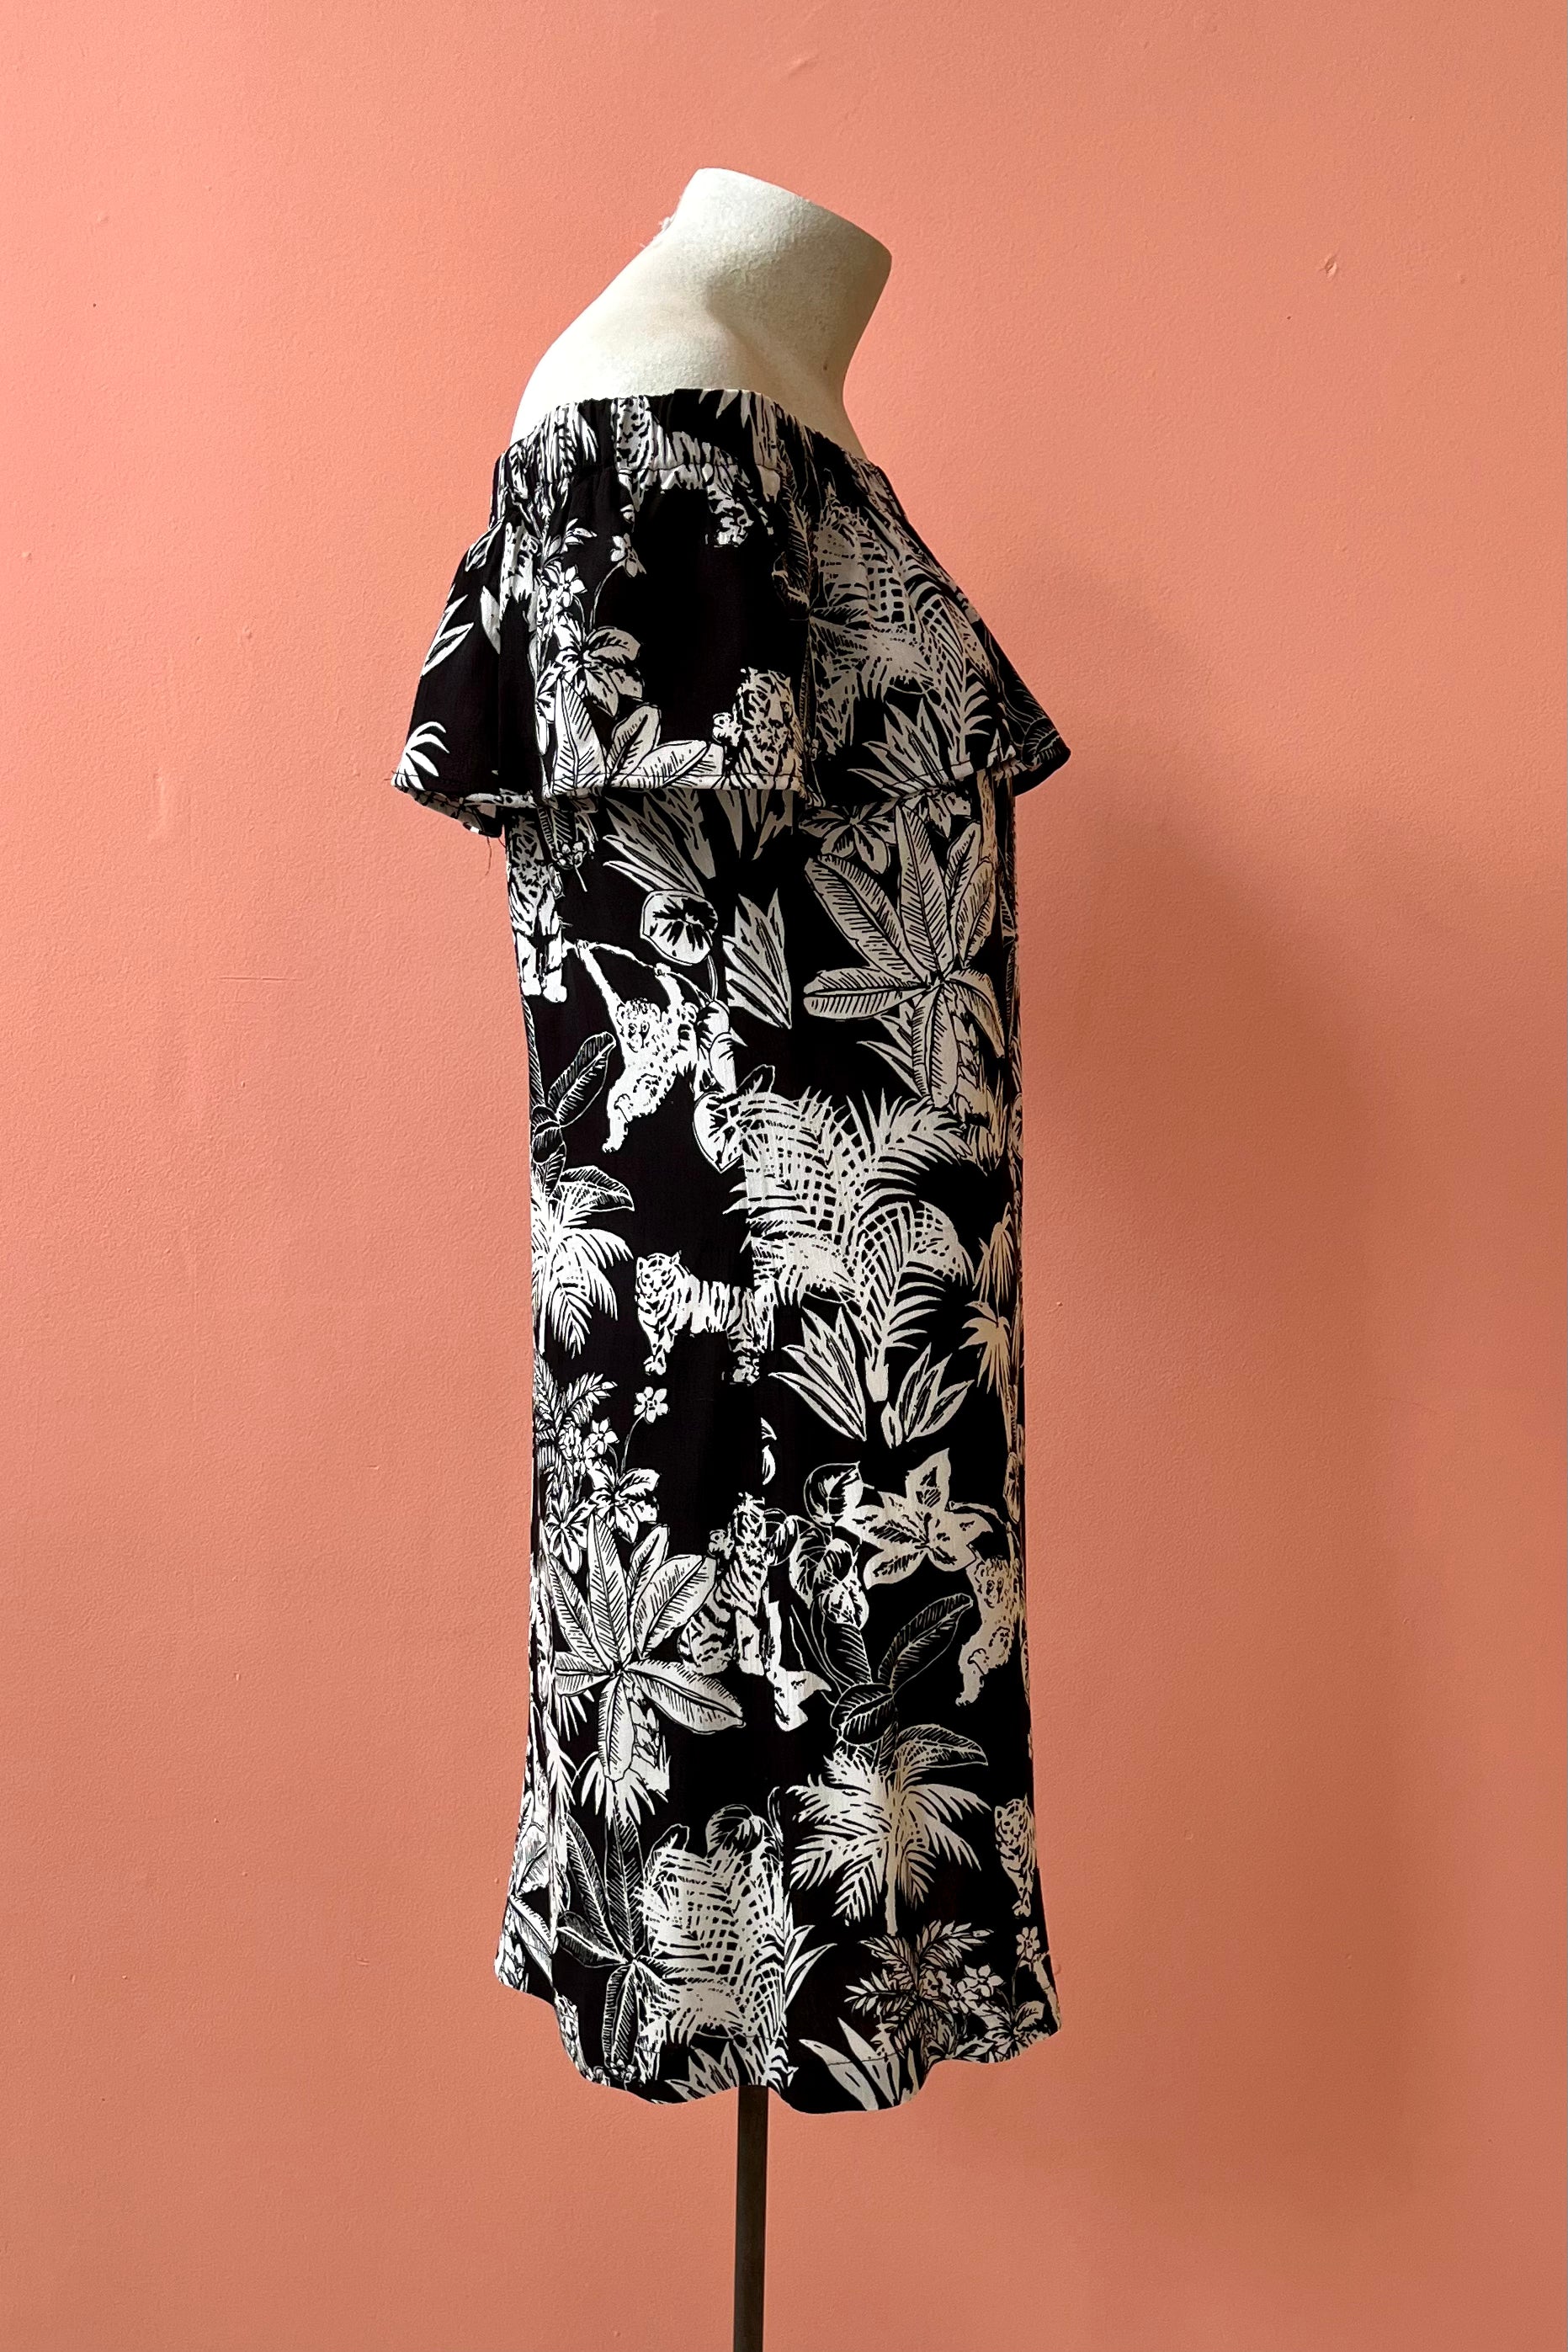 Bare Dress by Yul Voy, side view, black and white jungle print, off the shoulder, short sleeves, straight cut, above the knee, sizes XS-XXL, made in Montreal